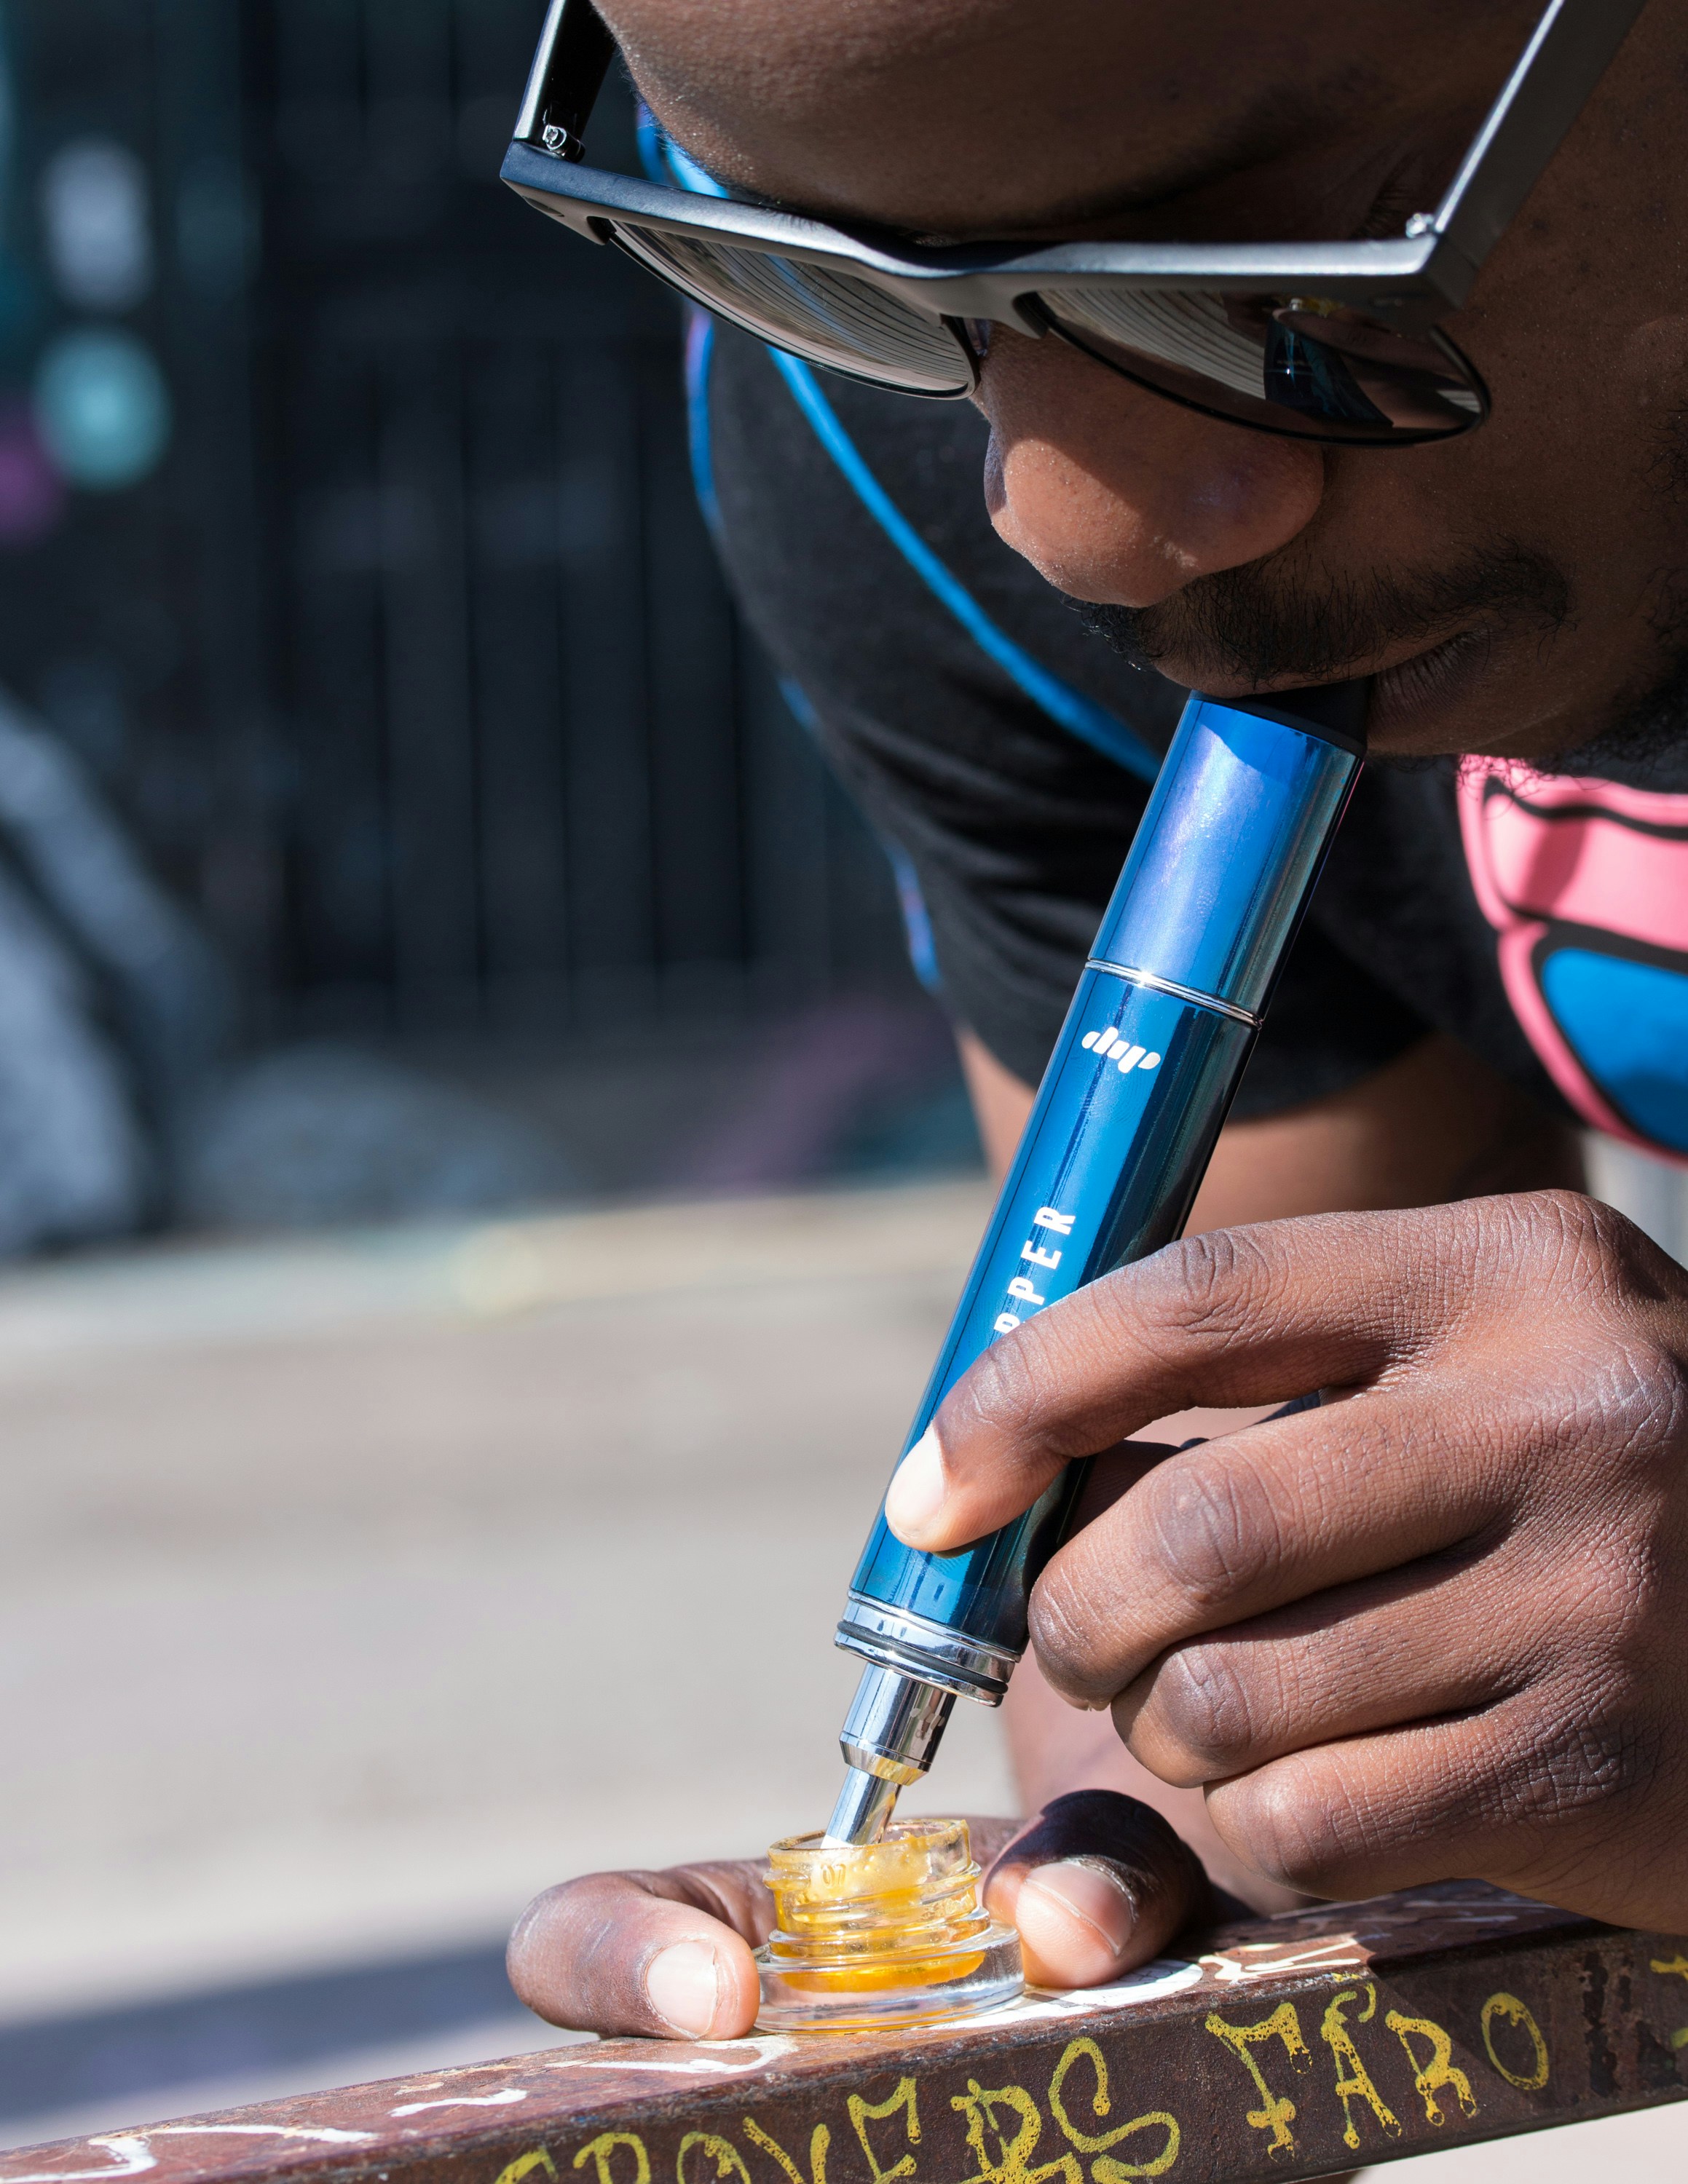 A man wearing sunglasses uses a blue Dip Devices Little Dipper dab pen to consume cannabis concentrates. Get your dab straw at https://dipdevices.com/